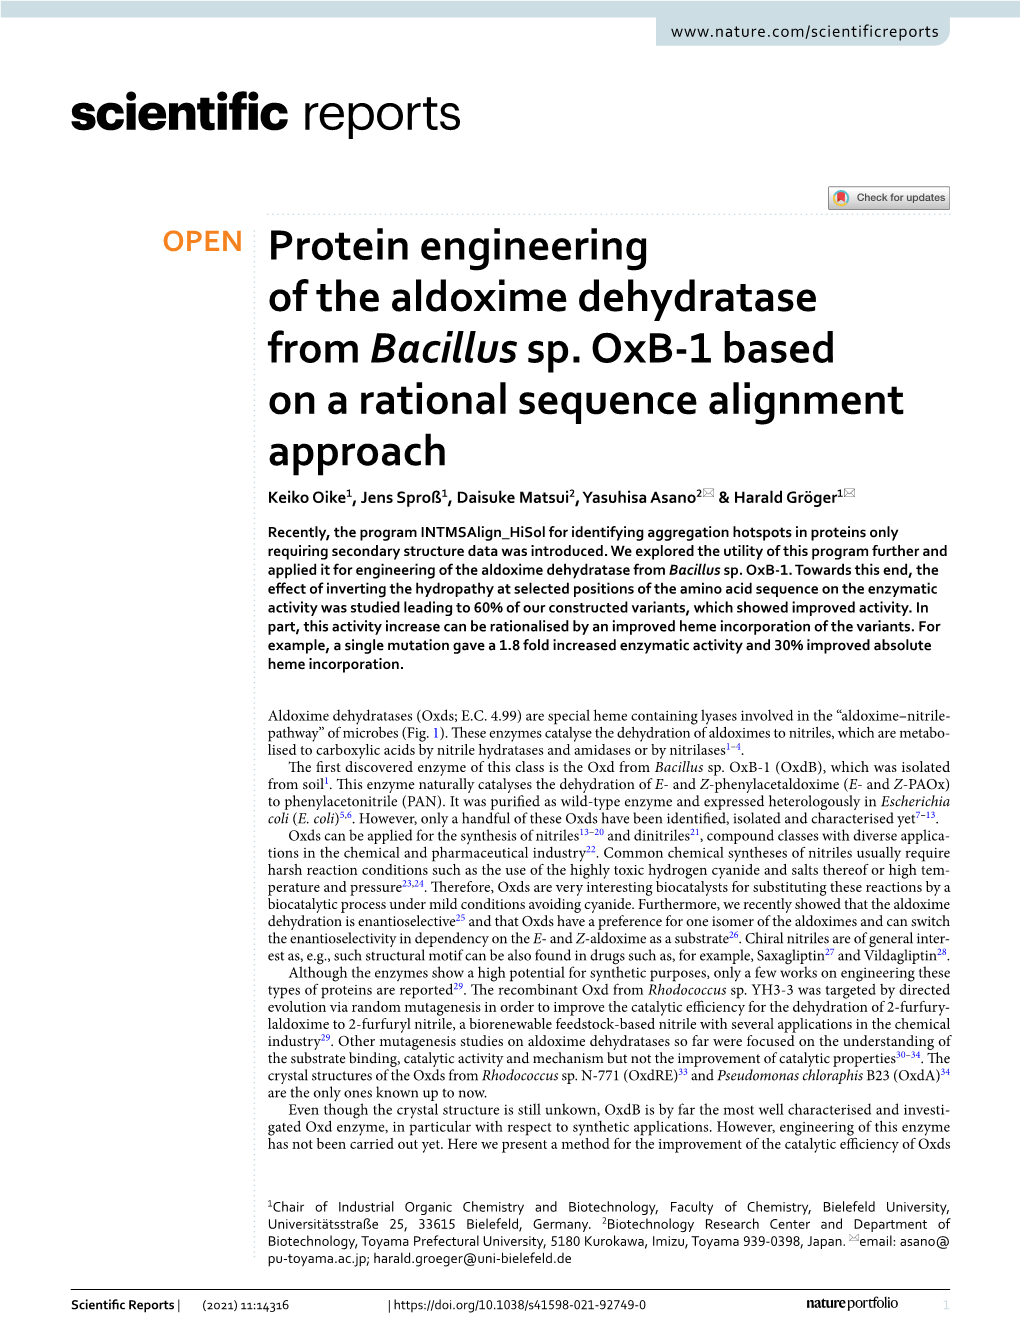 Protein Engineering of the Aldoxime Dehydratase from Bacillus Sp. Oxb